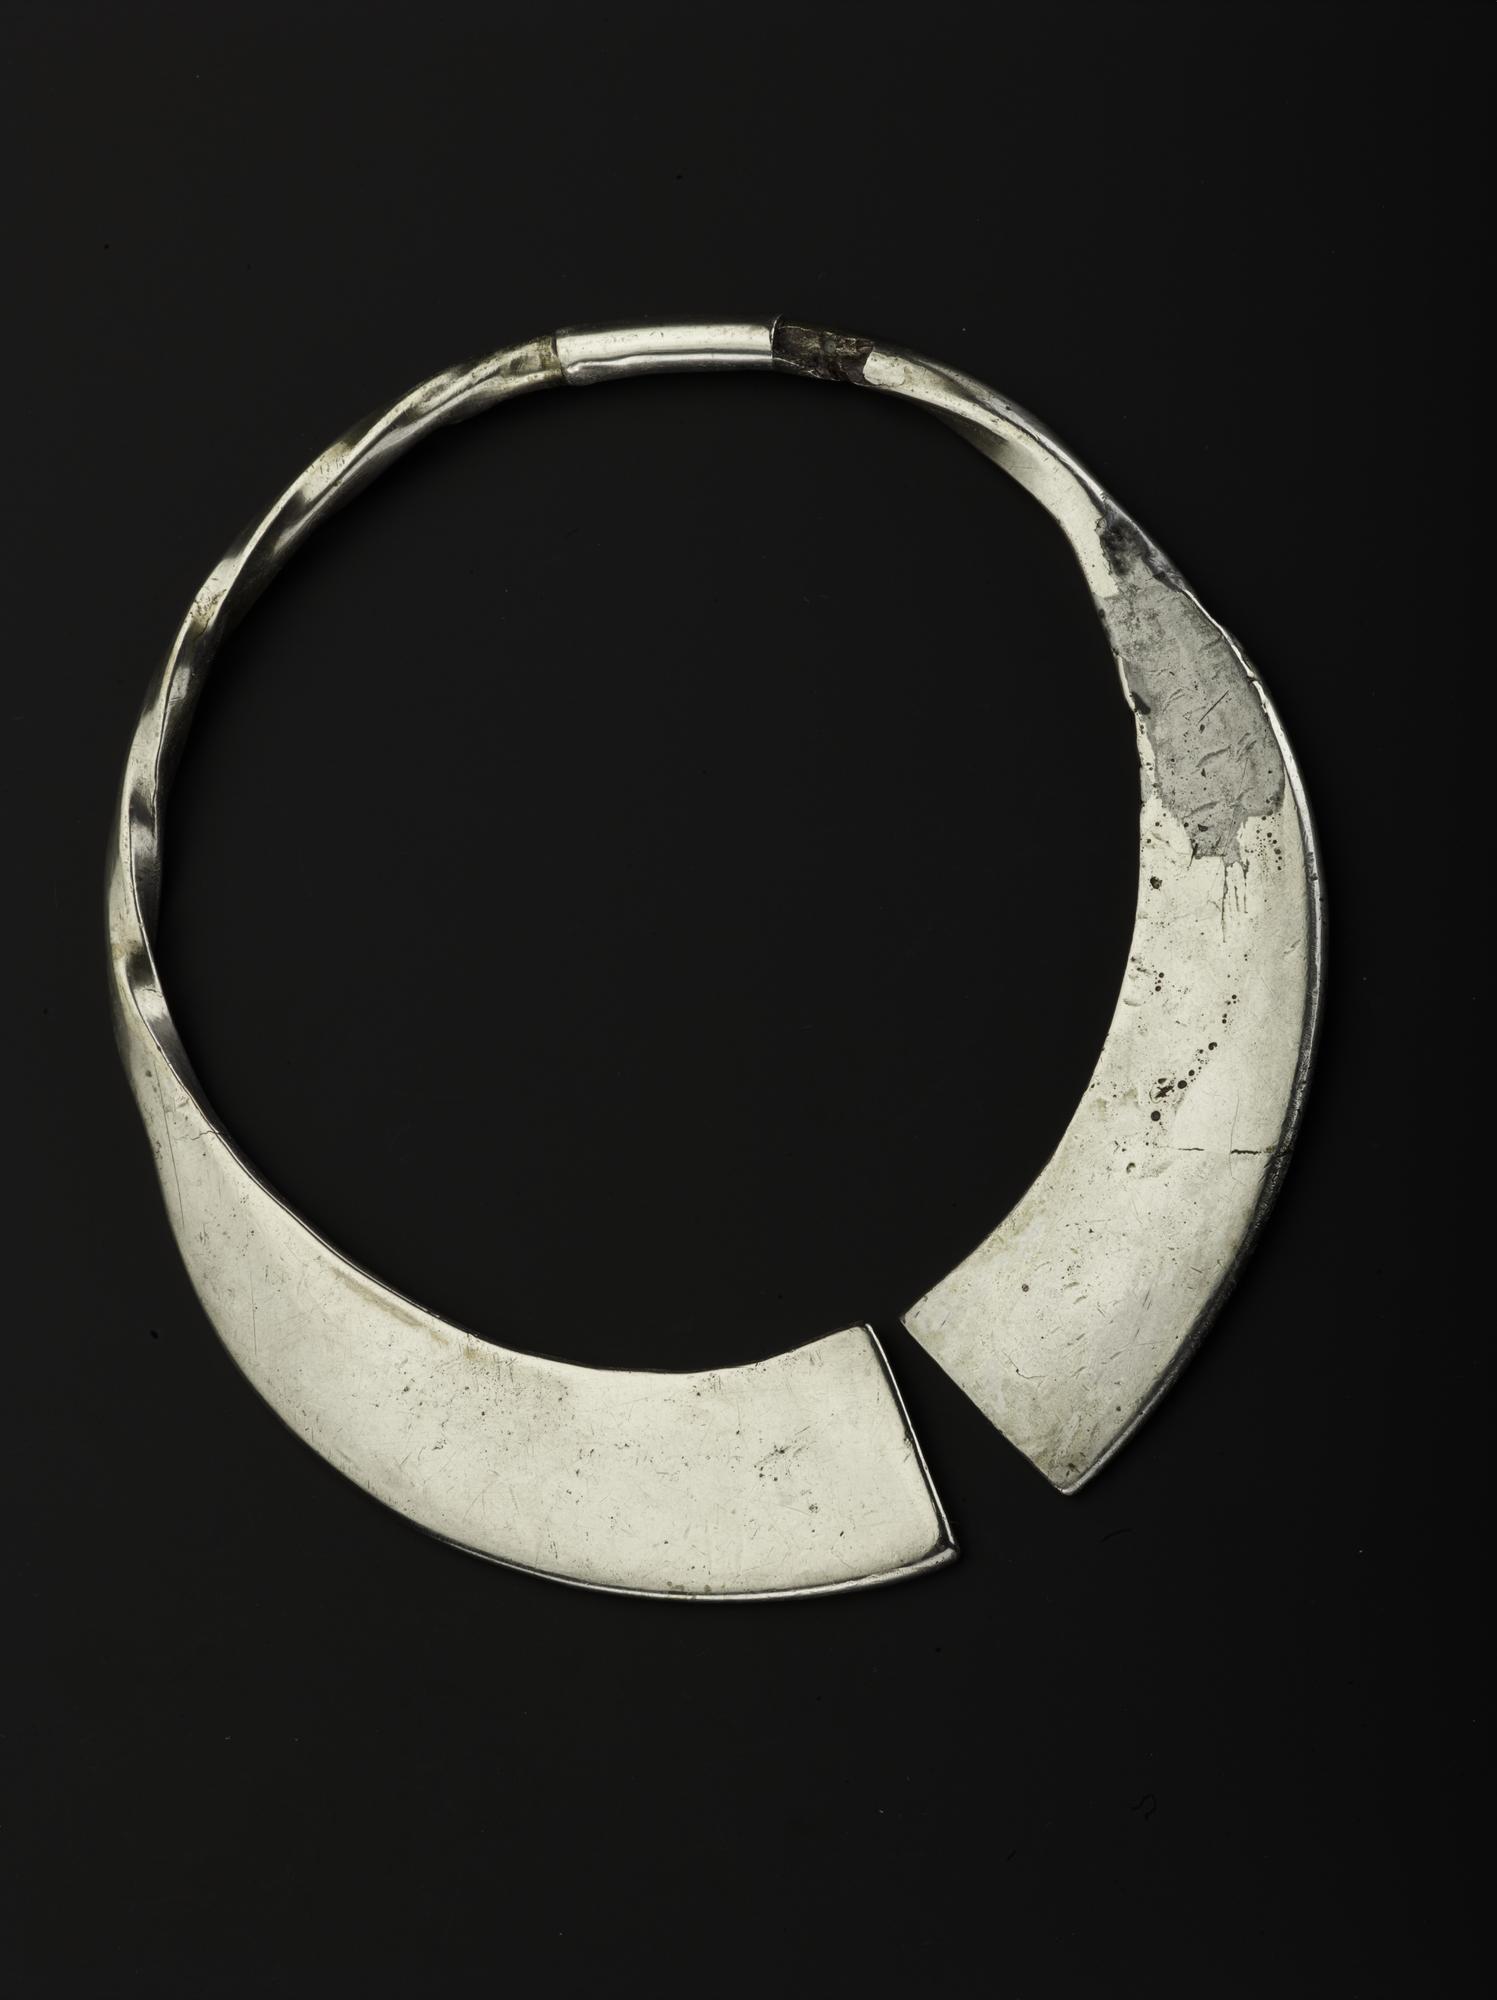 Image of Incomplete silver penannular brooch, pin missing, with plain terminals and twisted hoop, now broken into two pieces joined by a repair sleeve, from Norrie